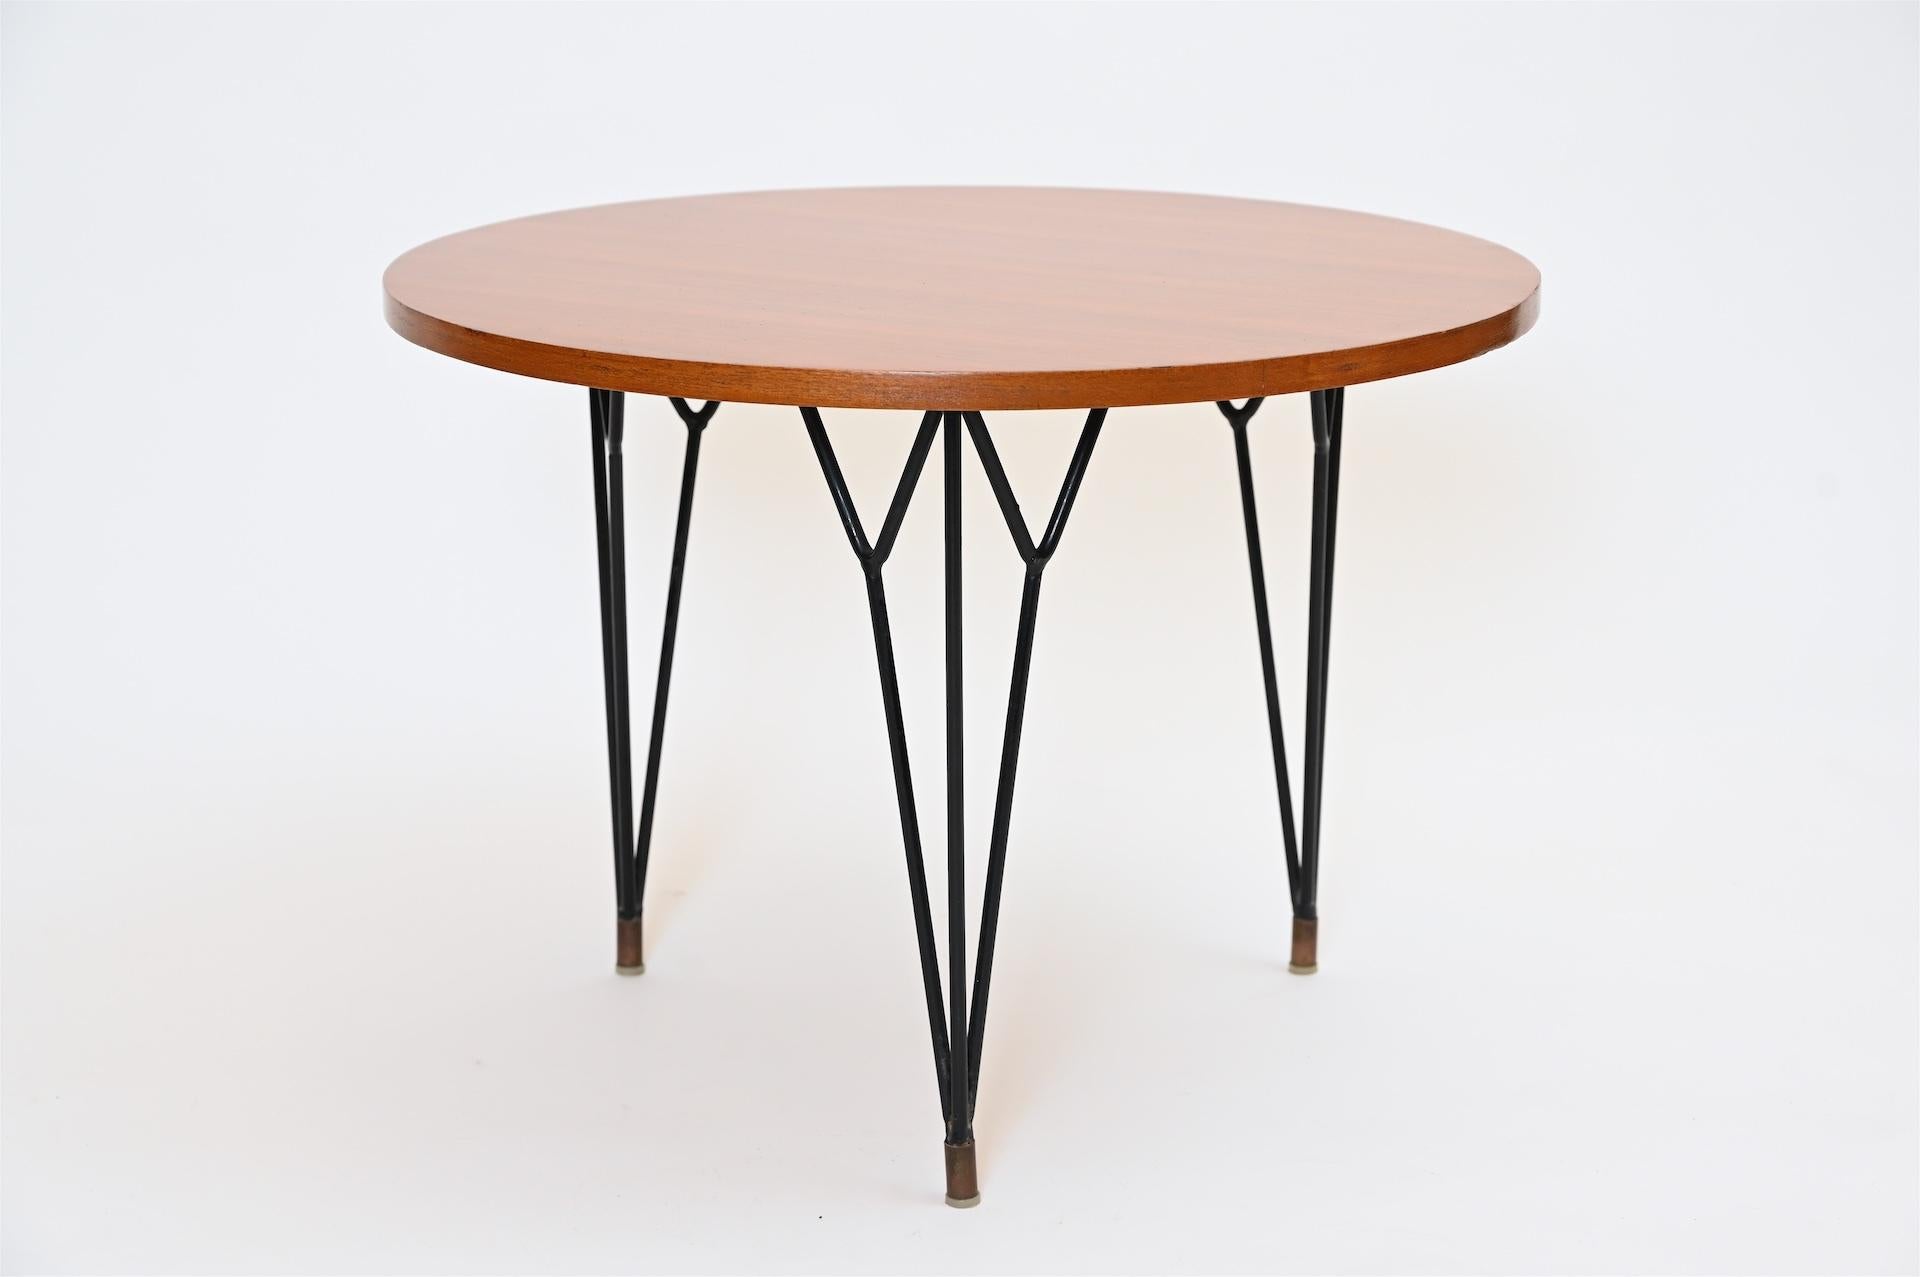 Midcentury side table in cherry with hairpin legs in excellent restored condition.